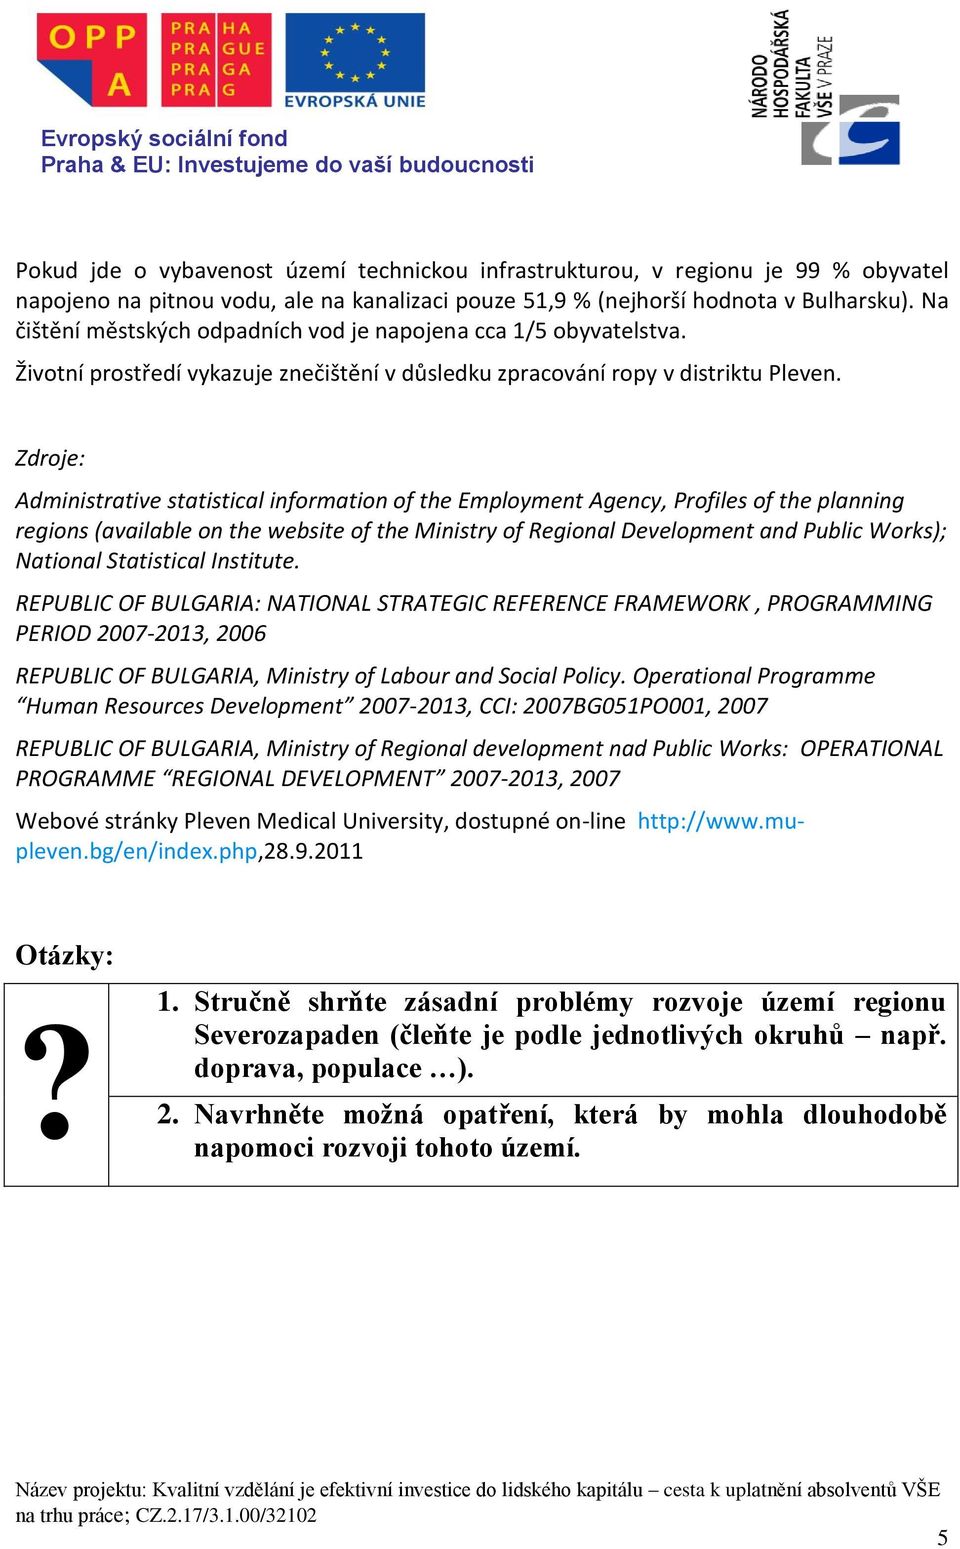 Zdroje: Administrative statistical information of the Employment Agency, Profiles of the planning regions (available on the website of the Ministry of Regional Development and Public Works); National